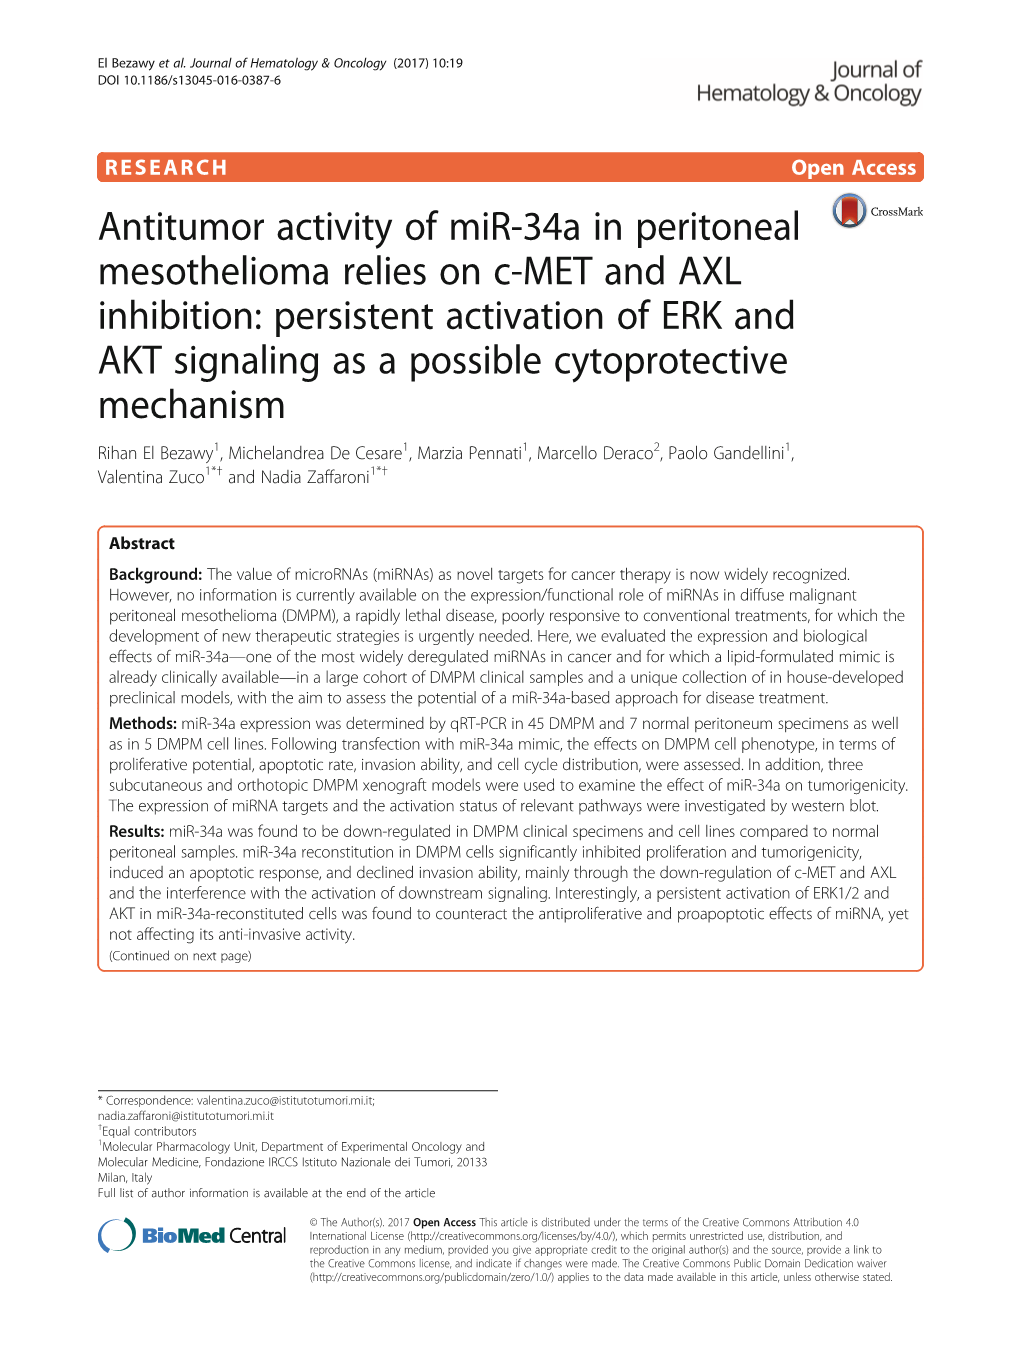 Antitumor Activity of Mir-34A in Peritoneal Mesothelioma Relies on C-MET and AXL Inhibition